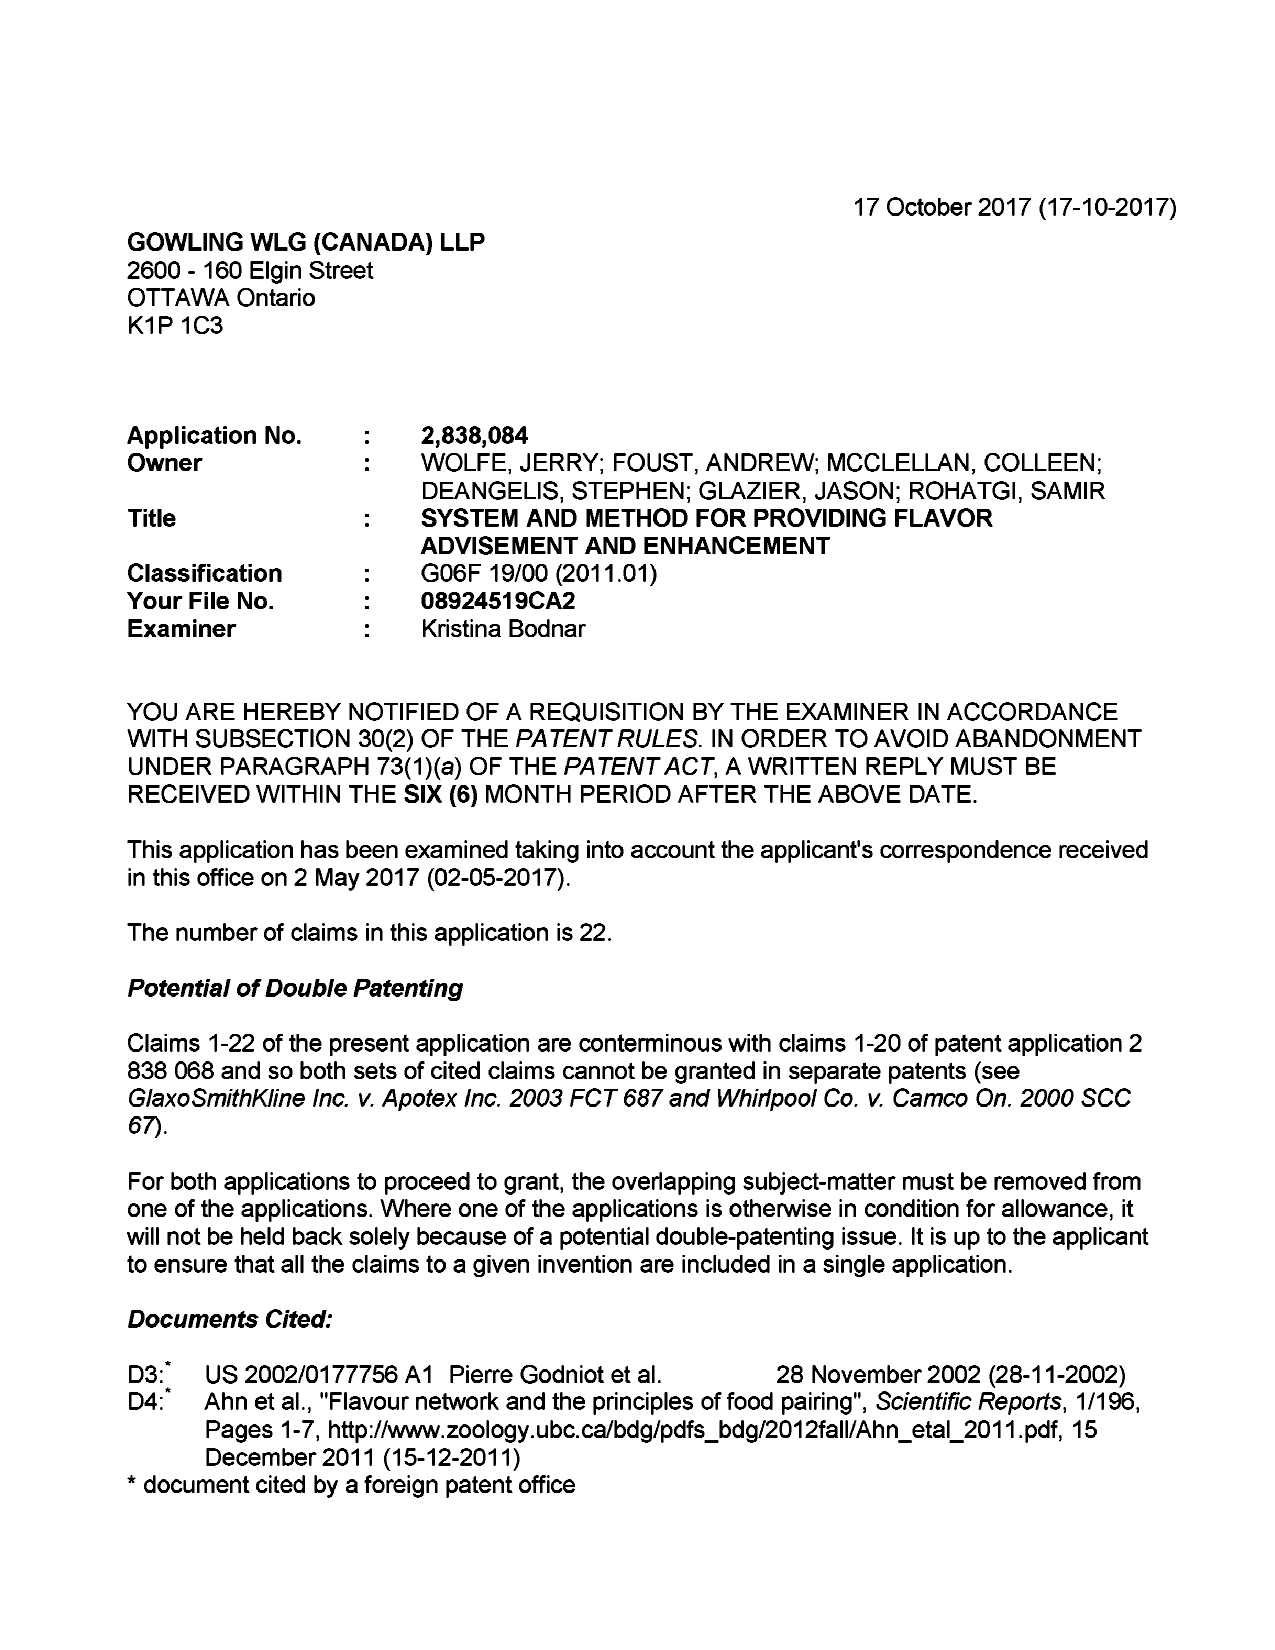 Canadian Patent Document 2838084. Examiner Requisition 20171017. Image 1 of 5